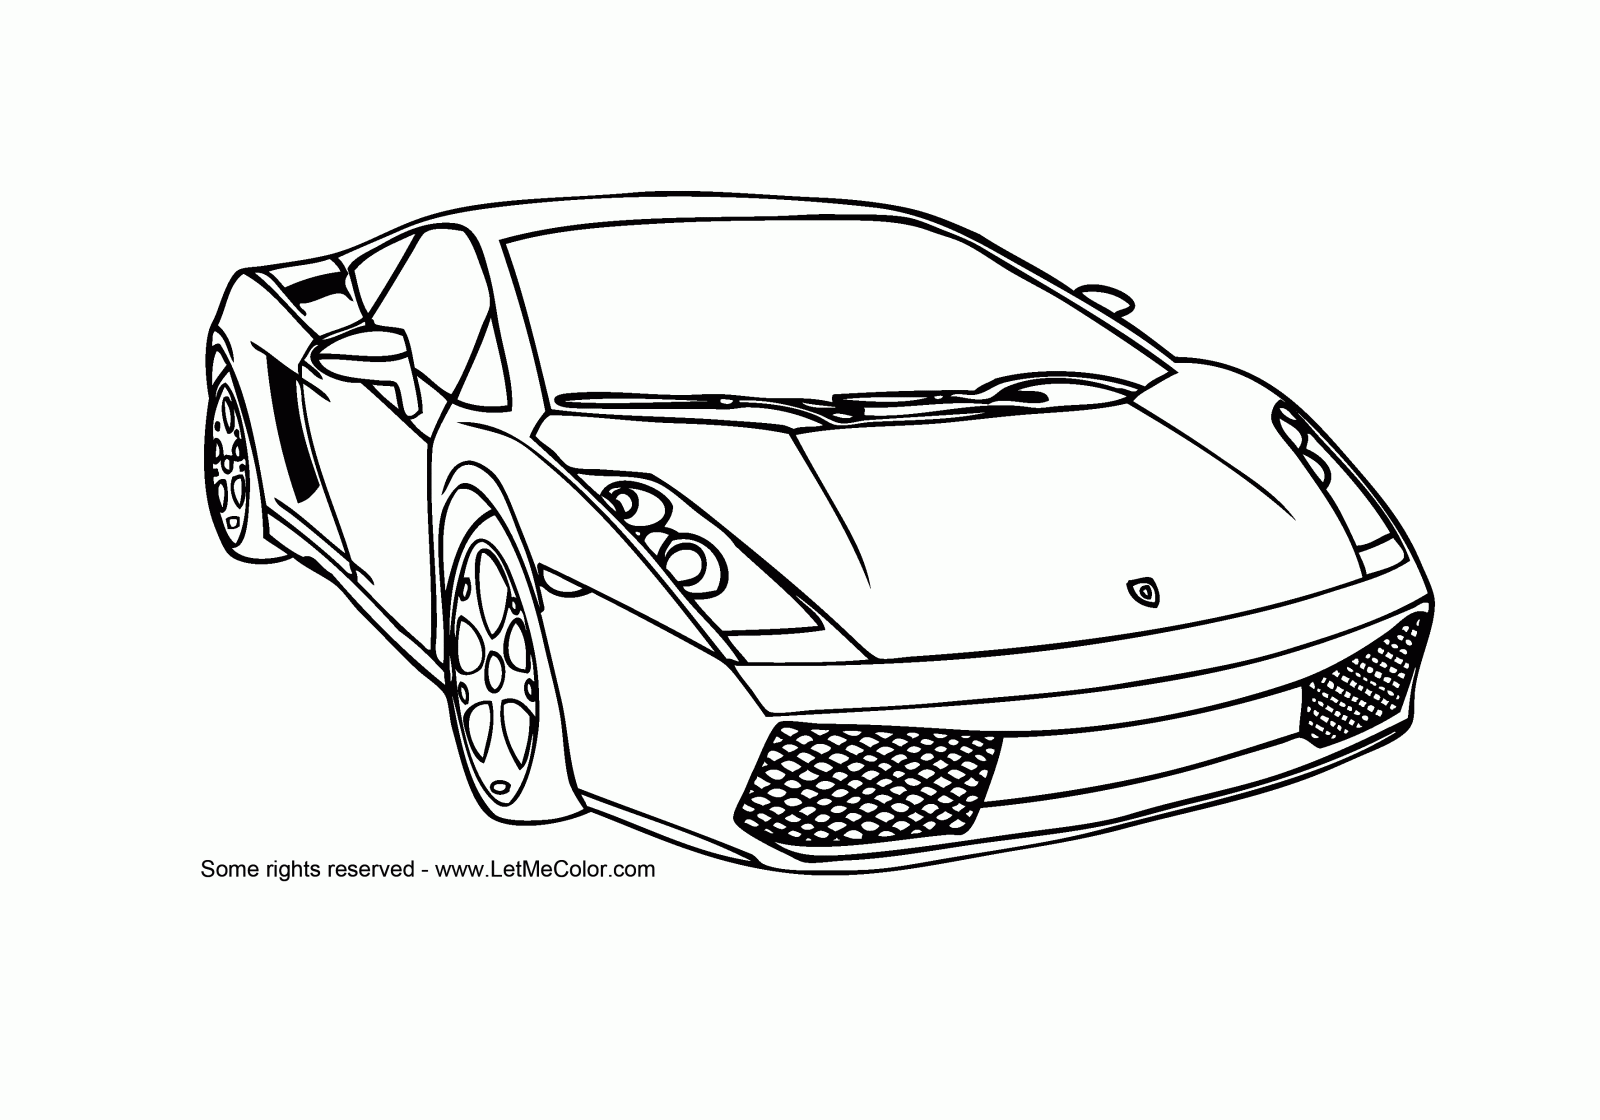 colouring pages for adults cars sports cars coloring pages free large images coloring for adults colouring cars pages 